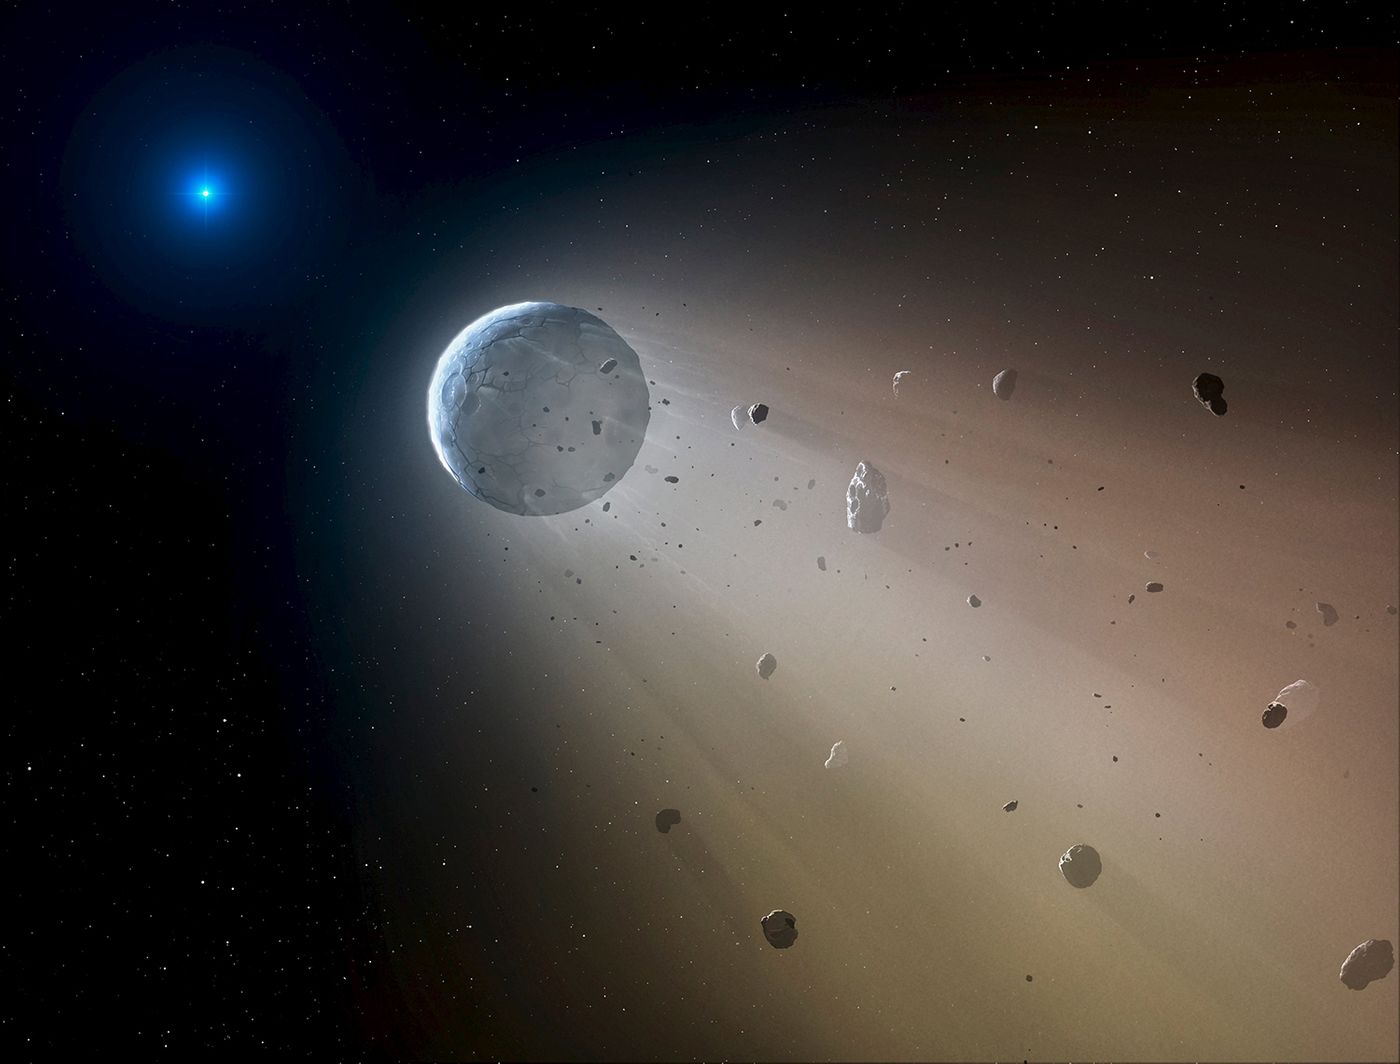 New research indicates asteroids don't have to be super close to the Sun to be destroyed by the heat.